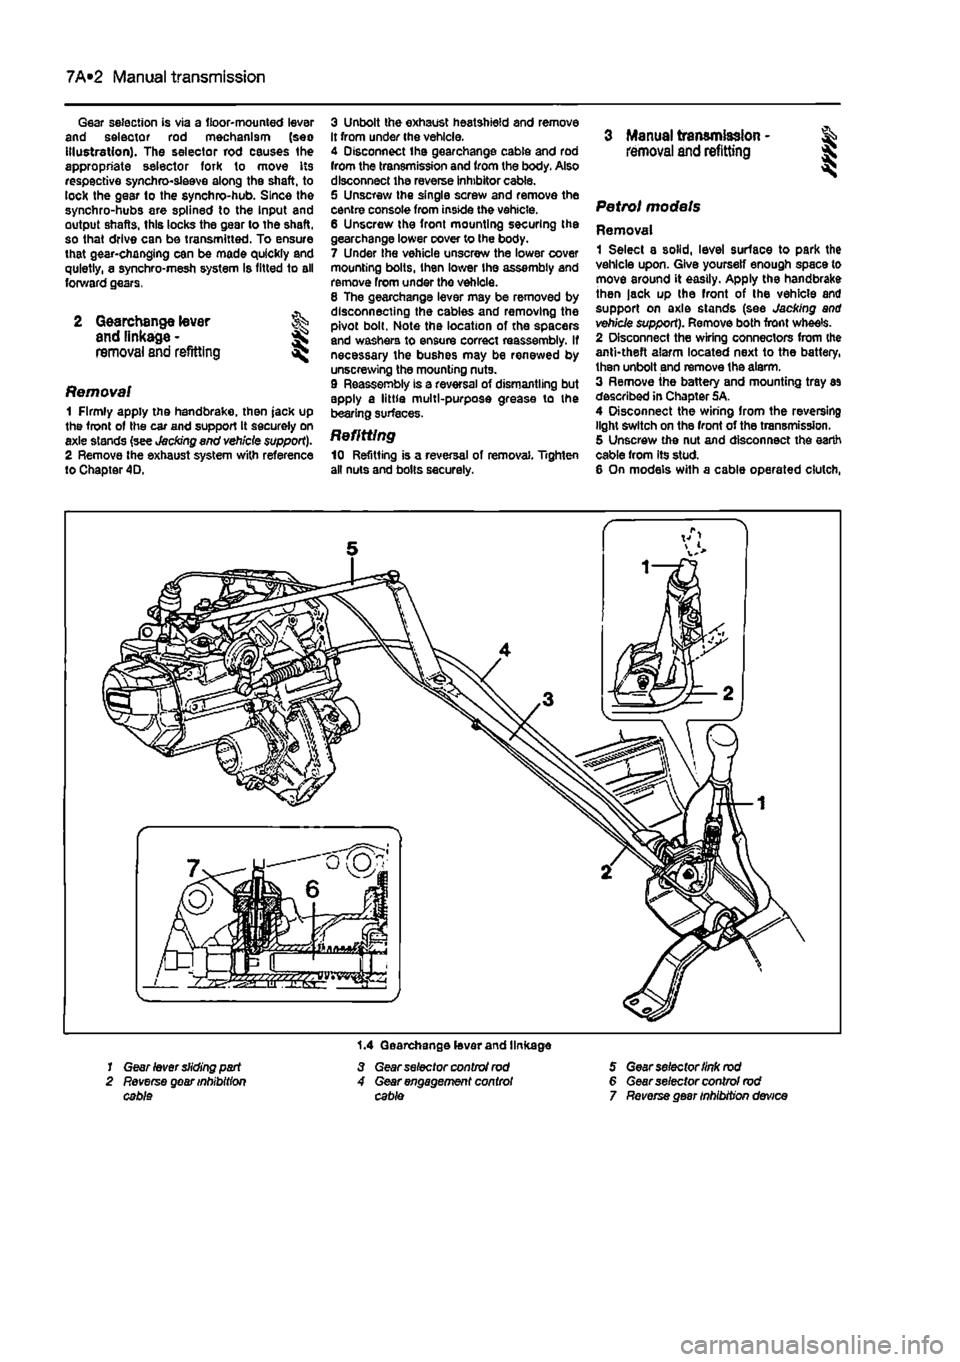 FIAT PUNTO 1999 176 / 1.G Owners Guide 
7A*2 Manual transmission 
Gear selection is via a floor-mounted lever and selector rod mechanism (seo Illustration). The selector rod causes the appropriate selector fork to move its respective synch